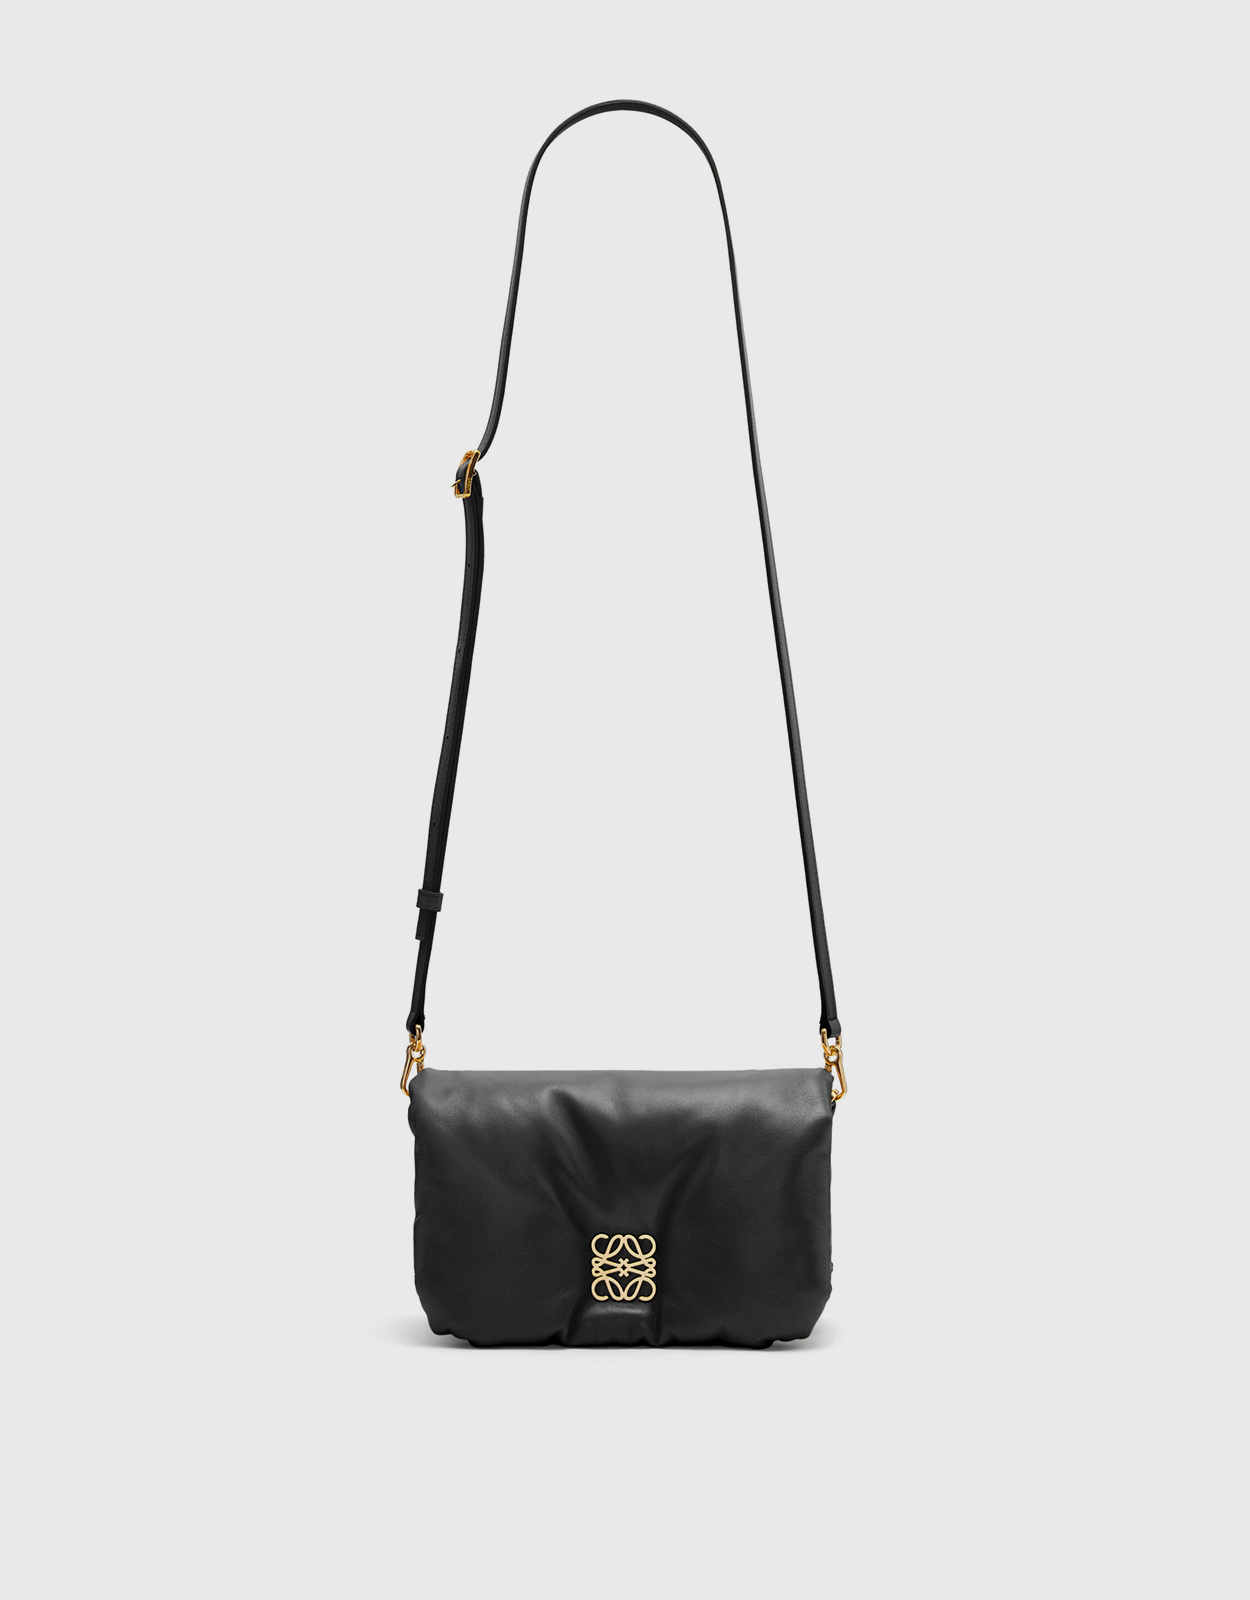 Buy Loewe Puffer Goya bag in black shiny nappa lambskin at the Park Avenue  boutique. Loewe Puffer Goya bag in black shiny nappa lambskin from the best  world brands with delivery across